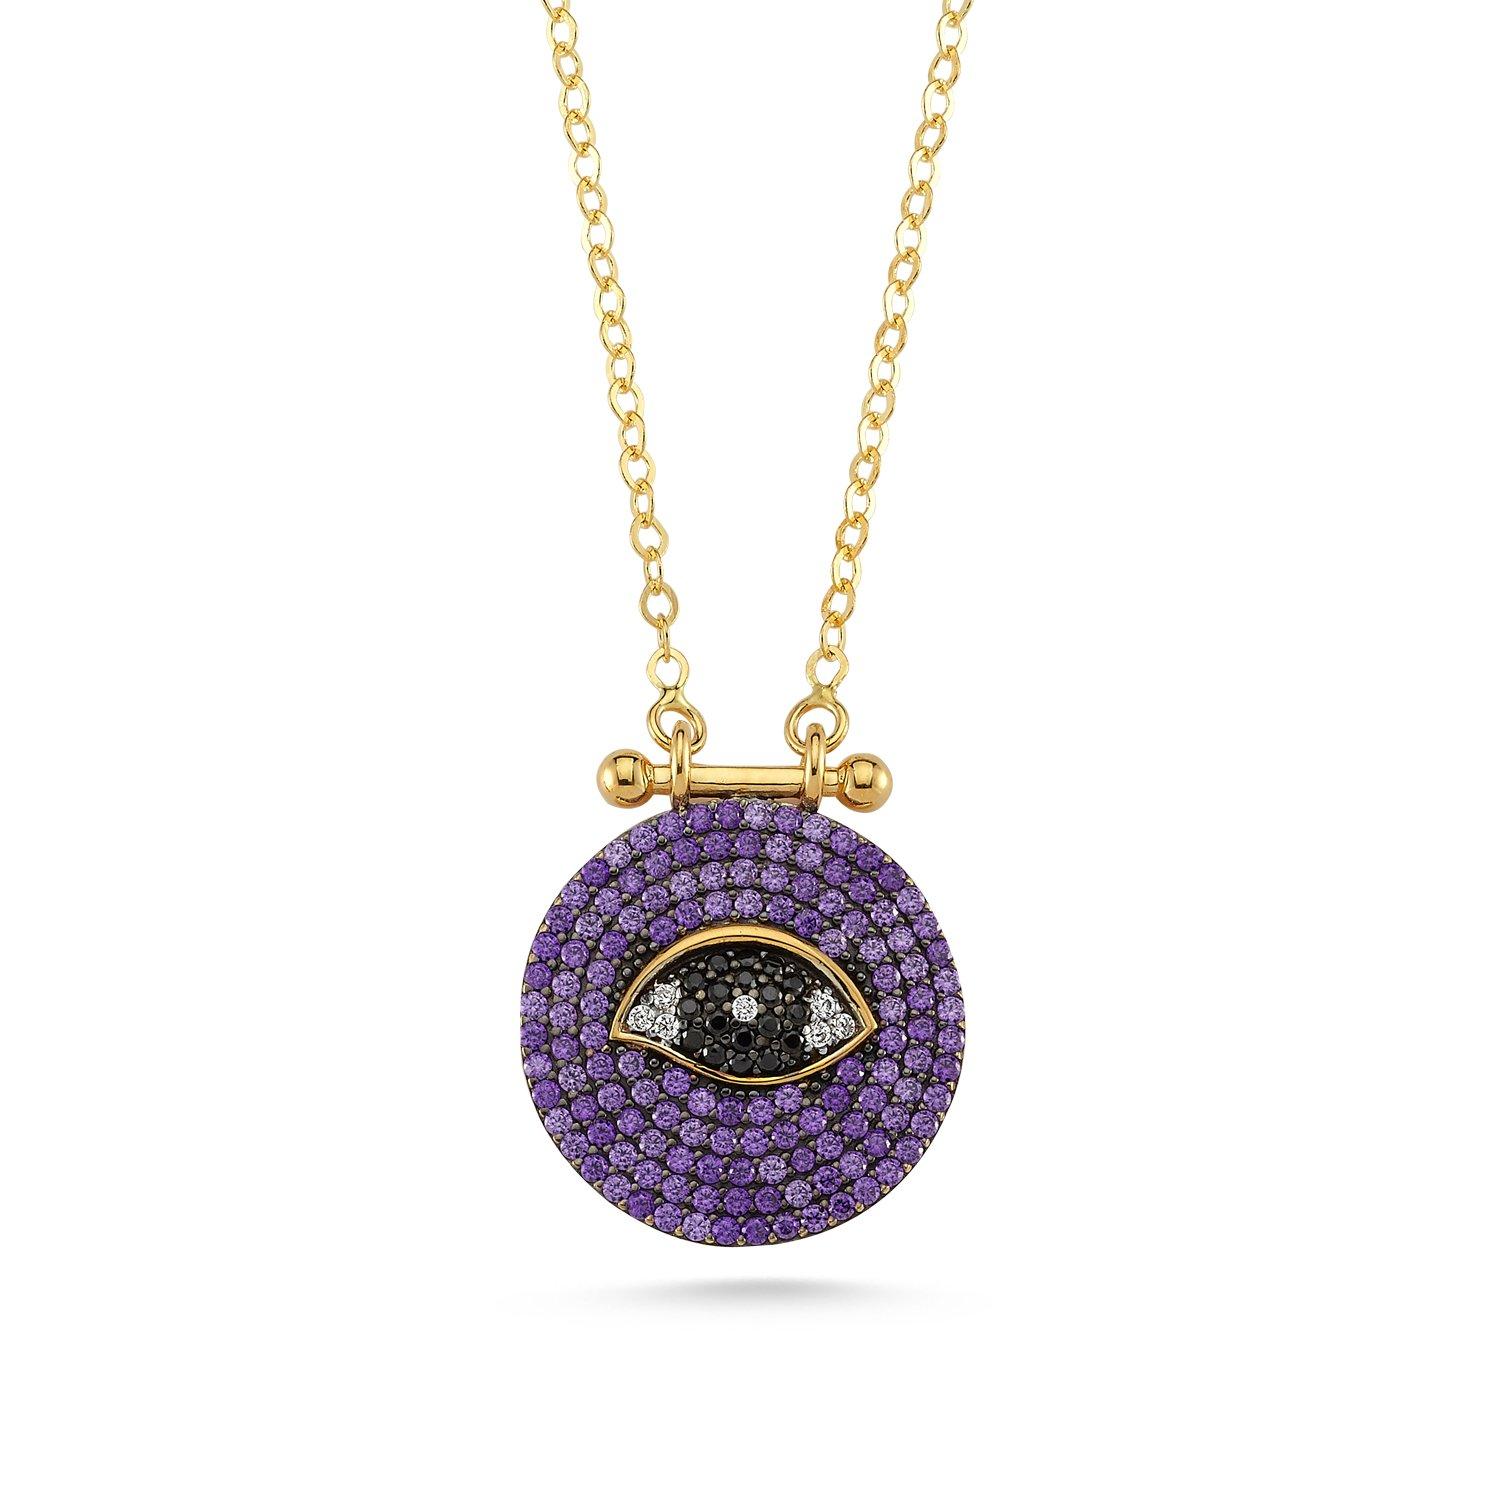 14k Yellow Gold  Evil Eye Medallion features pave Amethyst , sapphire and aquamarine.
Chain is approximately 18